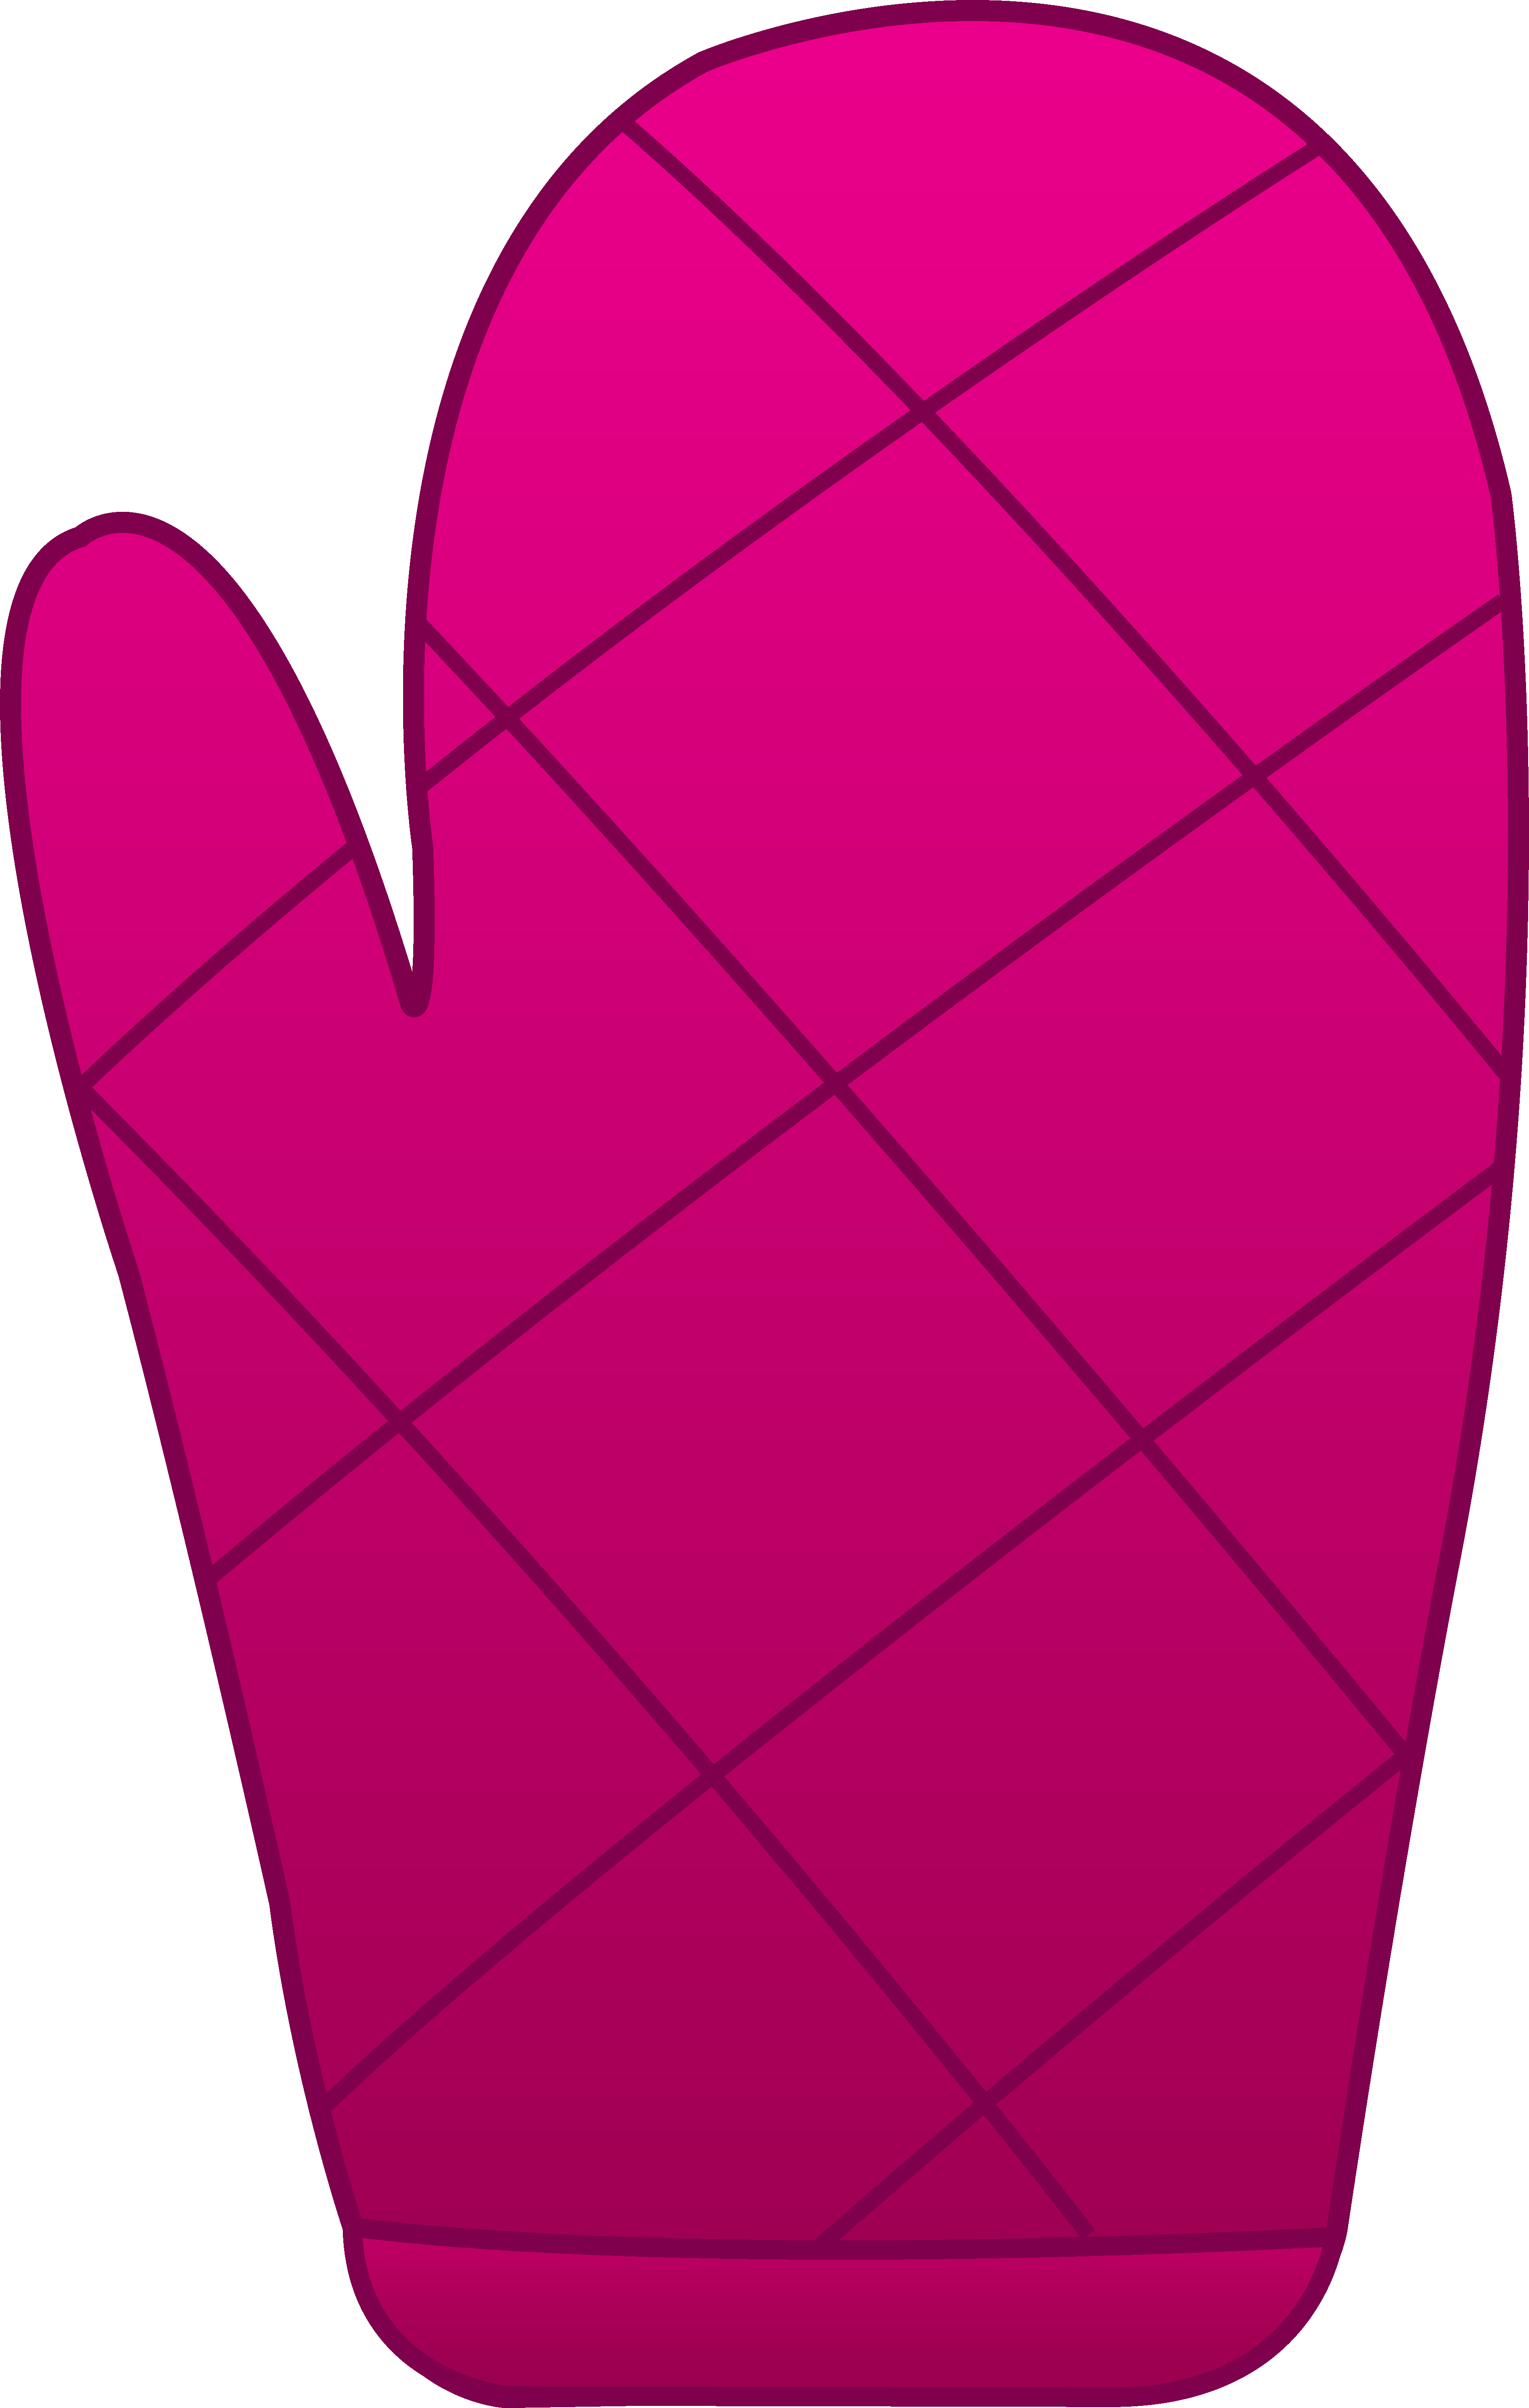 Glove clipart pink glove.  collection of oven